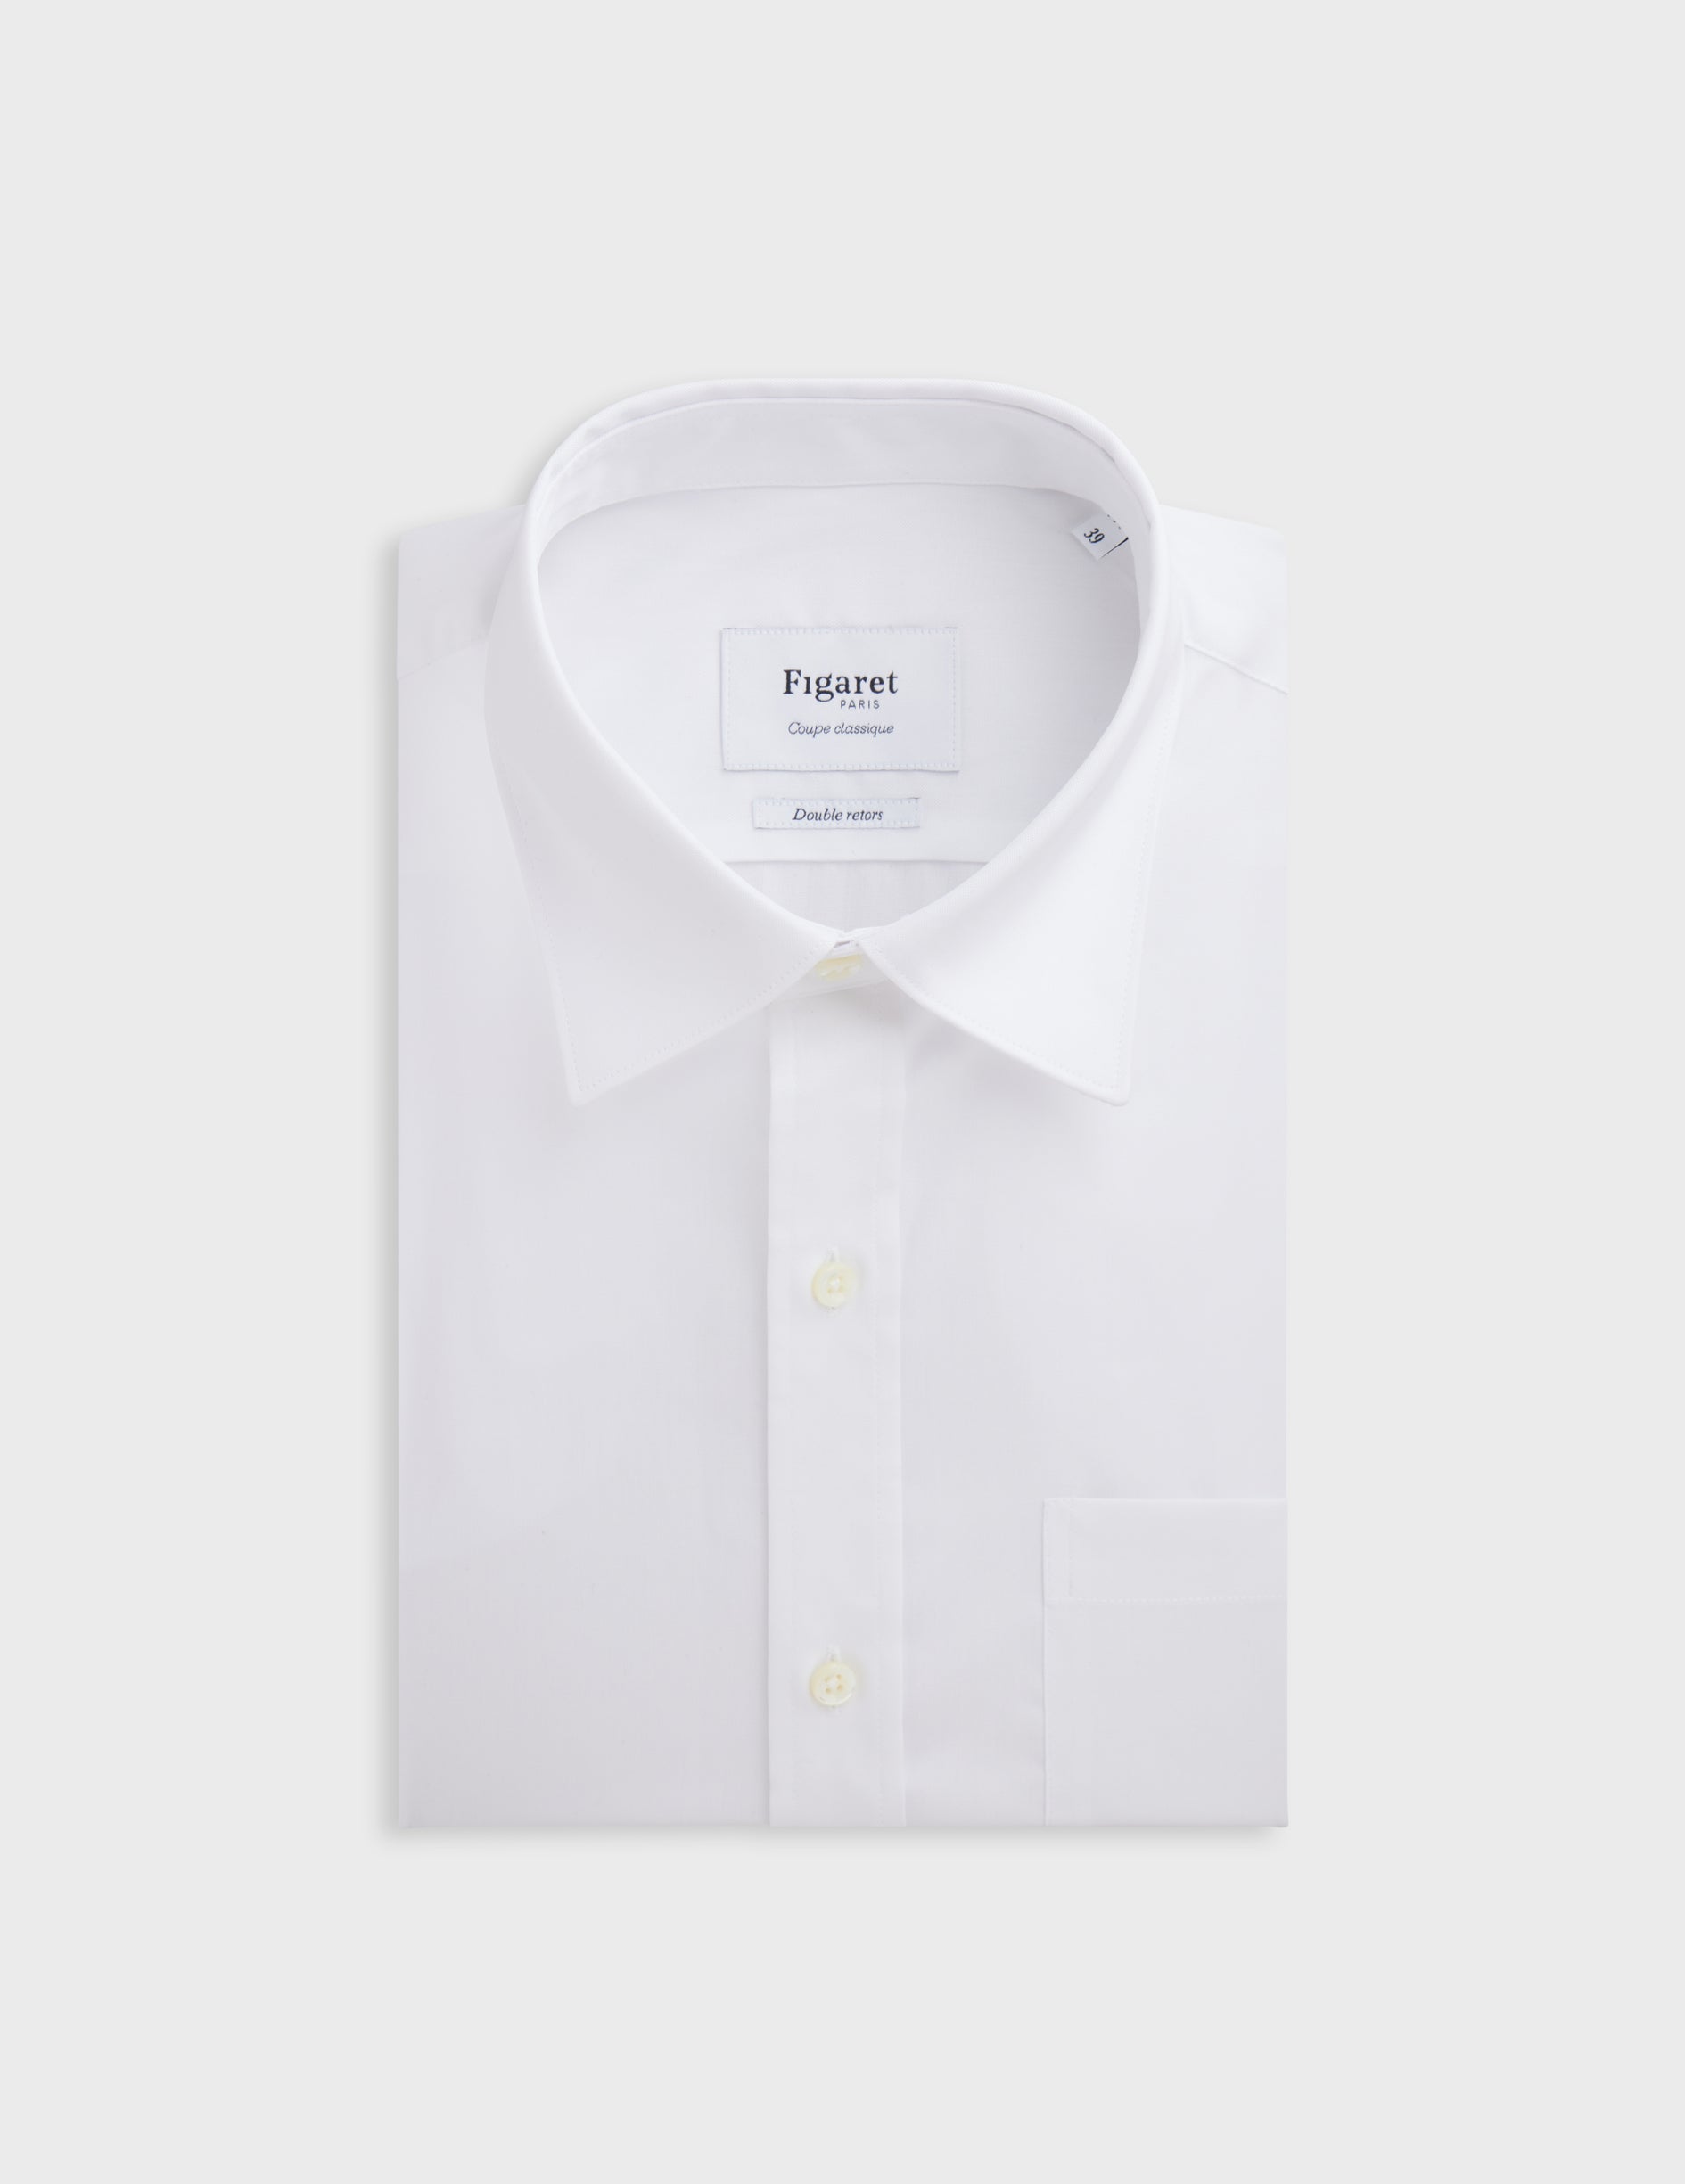 Classic white shirt - pin point - Figaret Collar